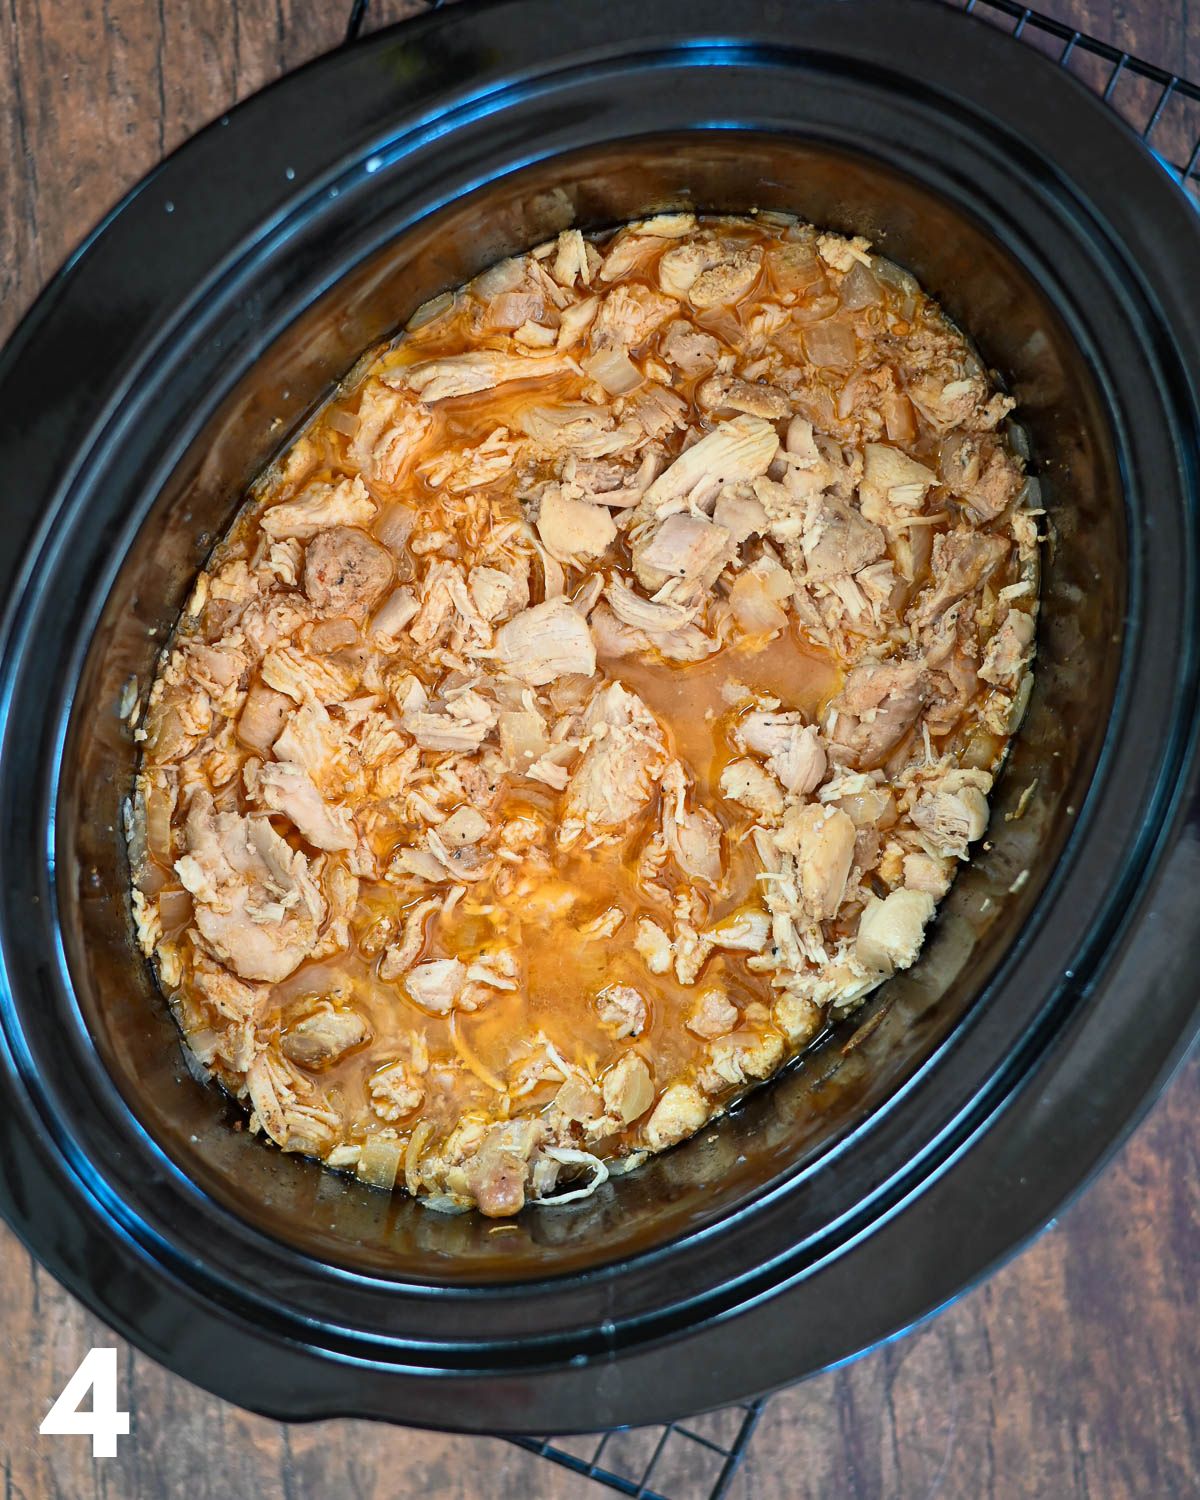 Cooked chicken in a crock pot.